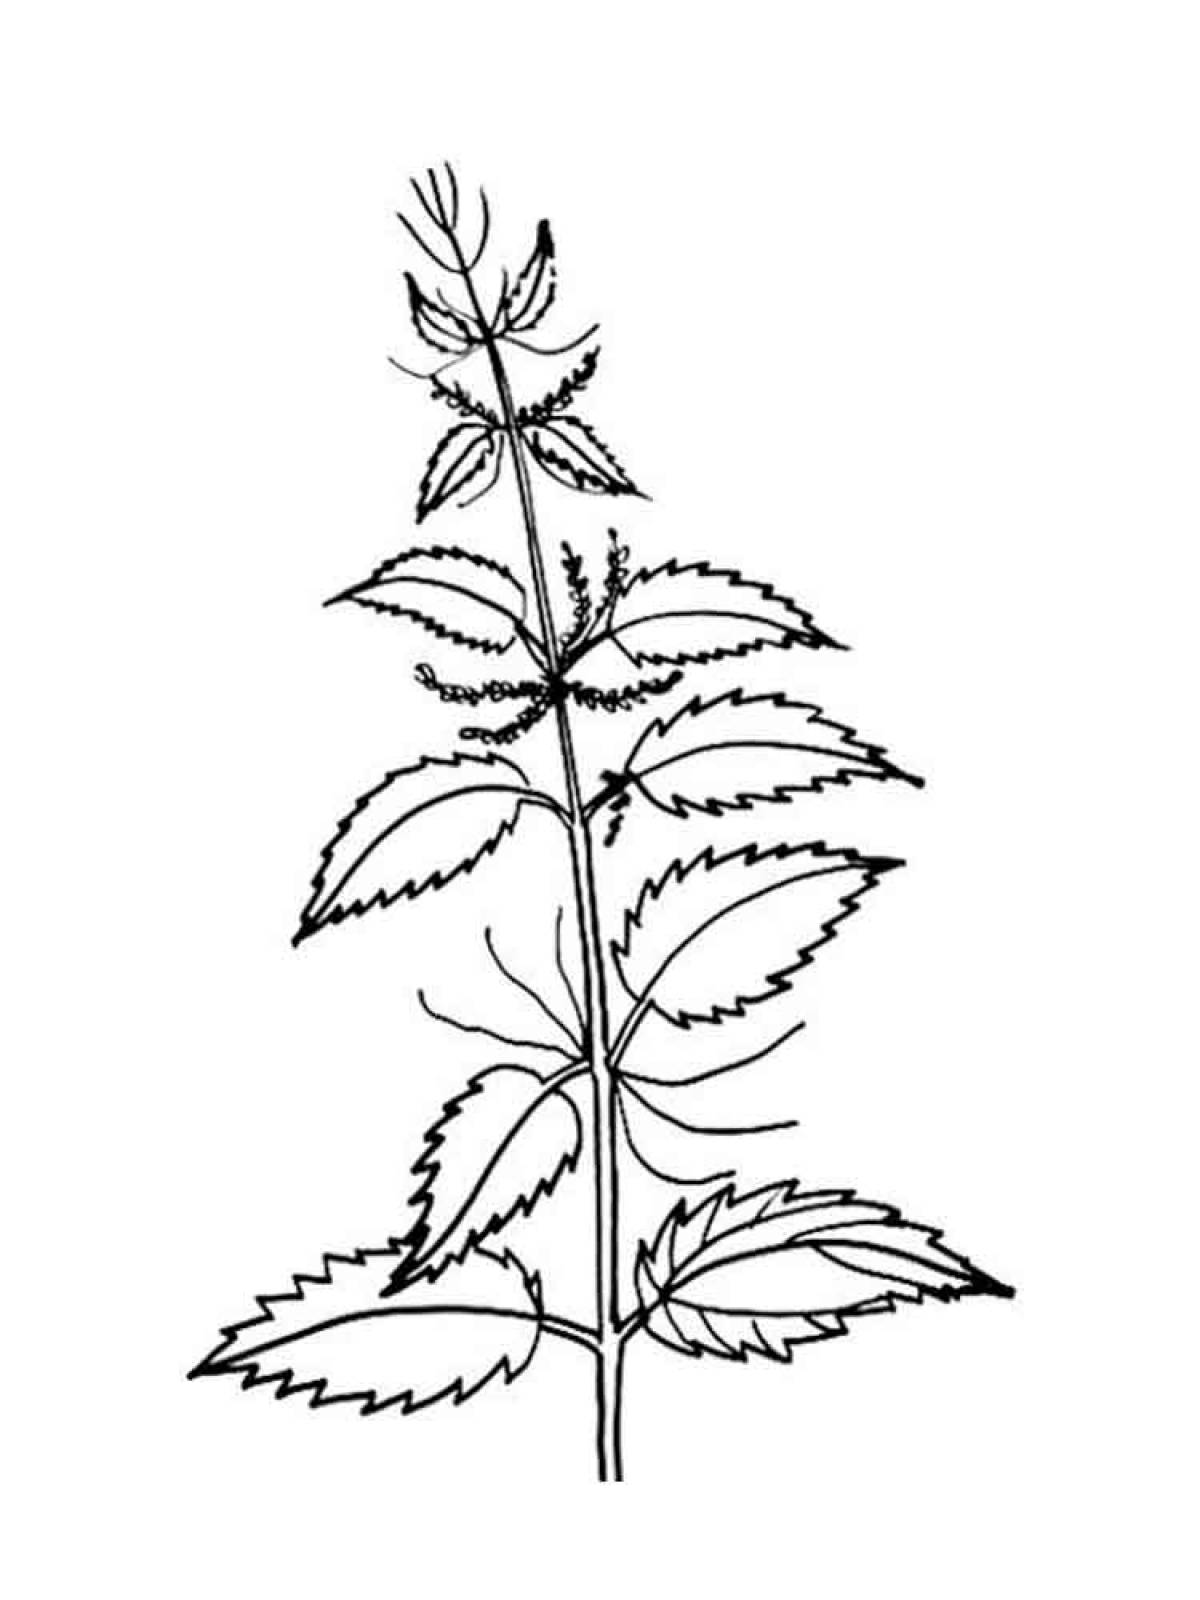 Nettle coloring page